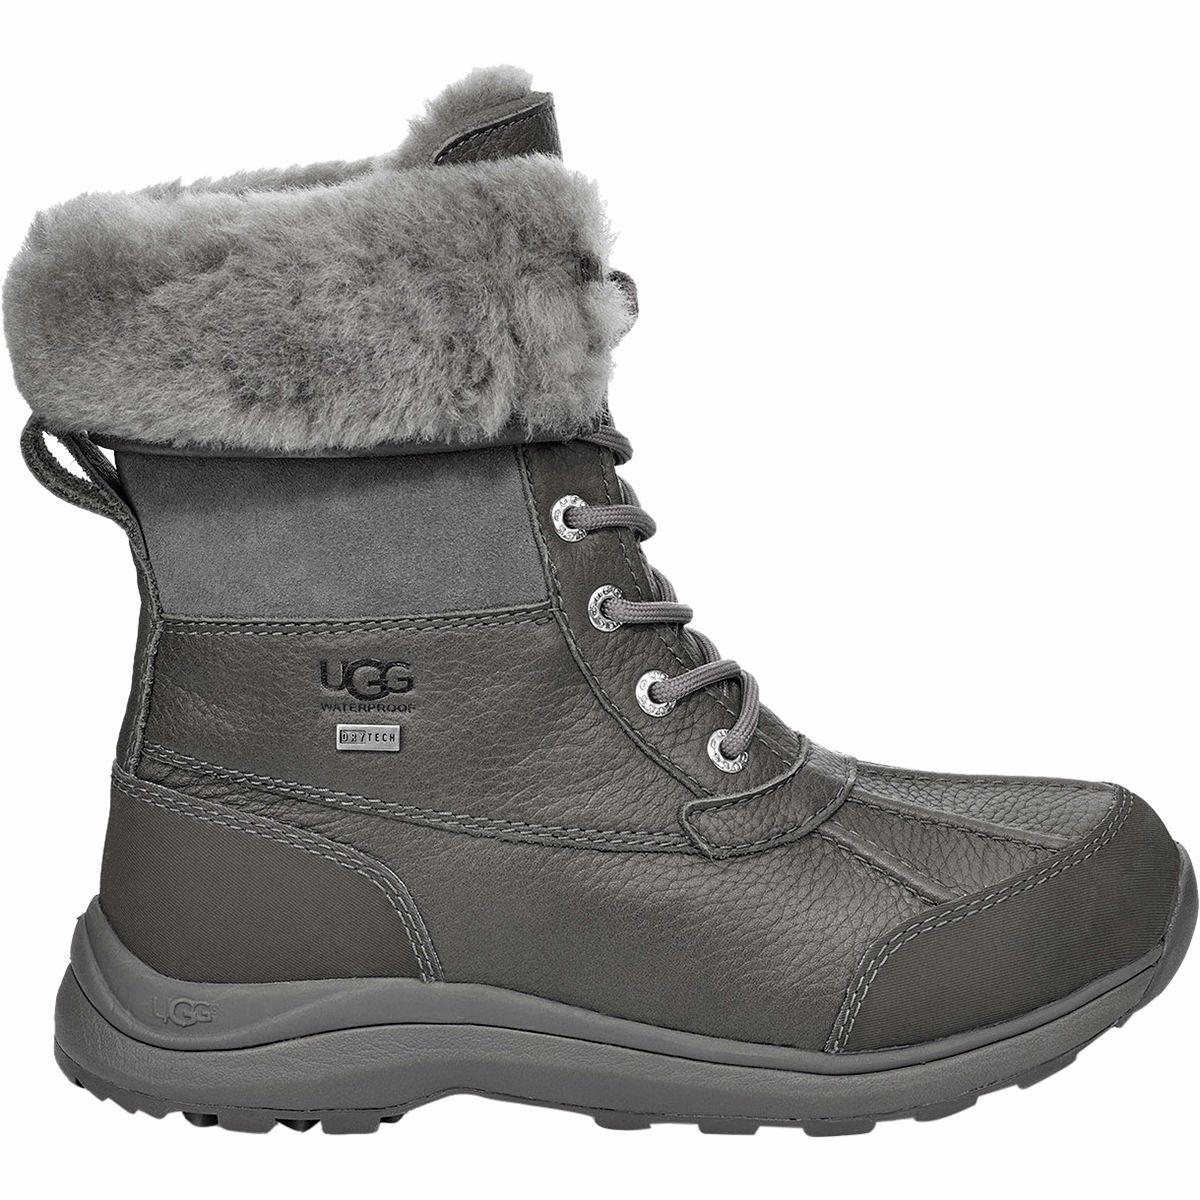 UGG Adirondack Iii Boot Leather in Charcoal (Gray) - Save 50% - Lyst